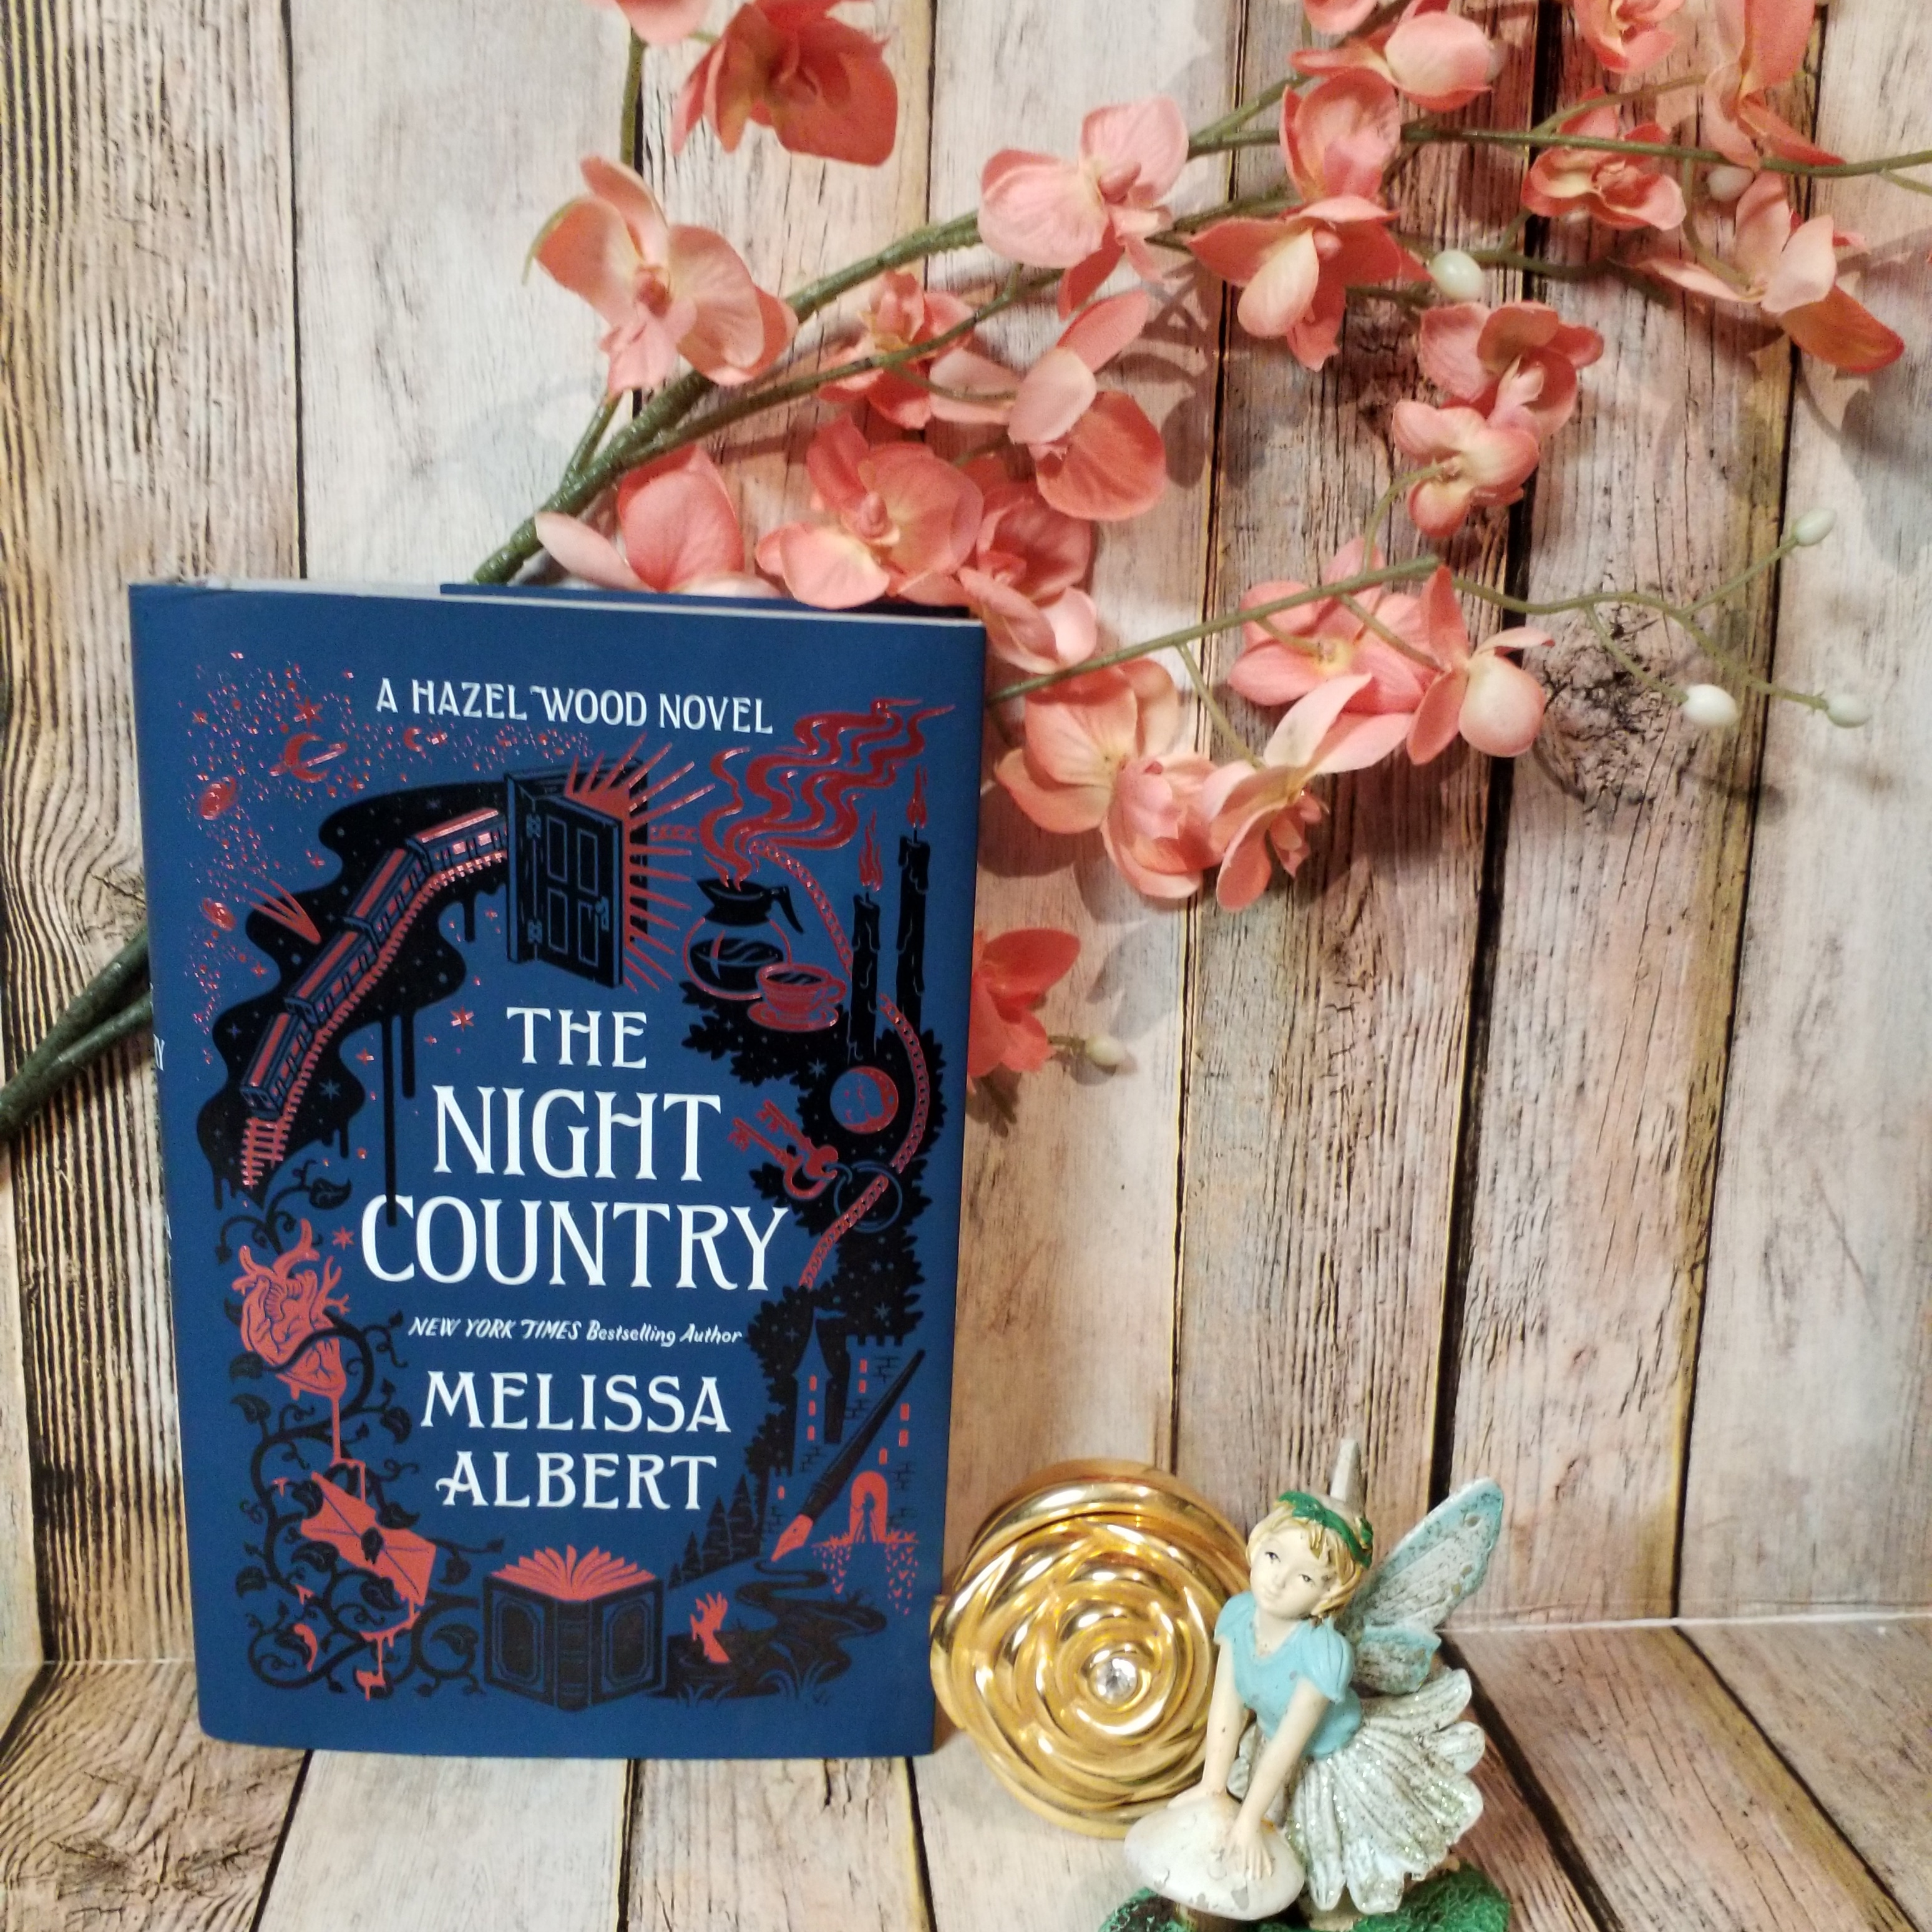 Download Book The night country a hazel wood novel For Free